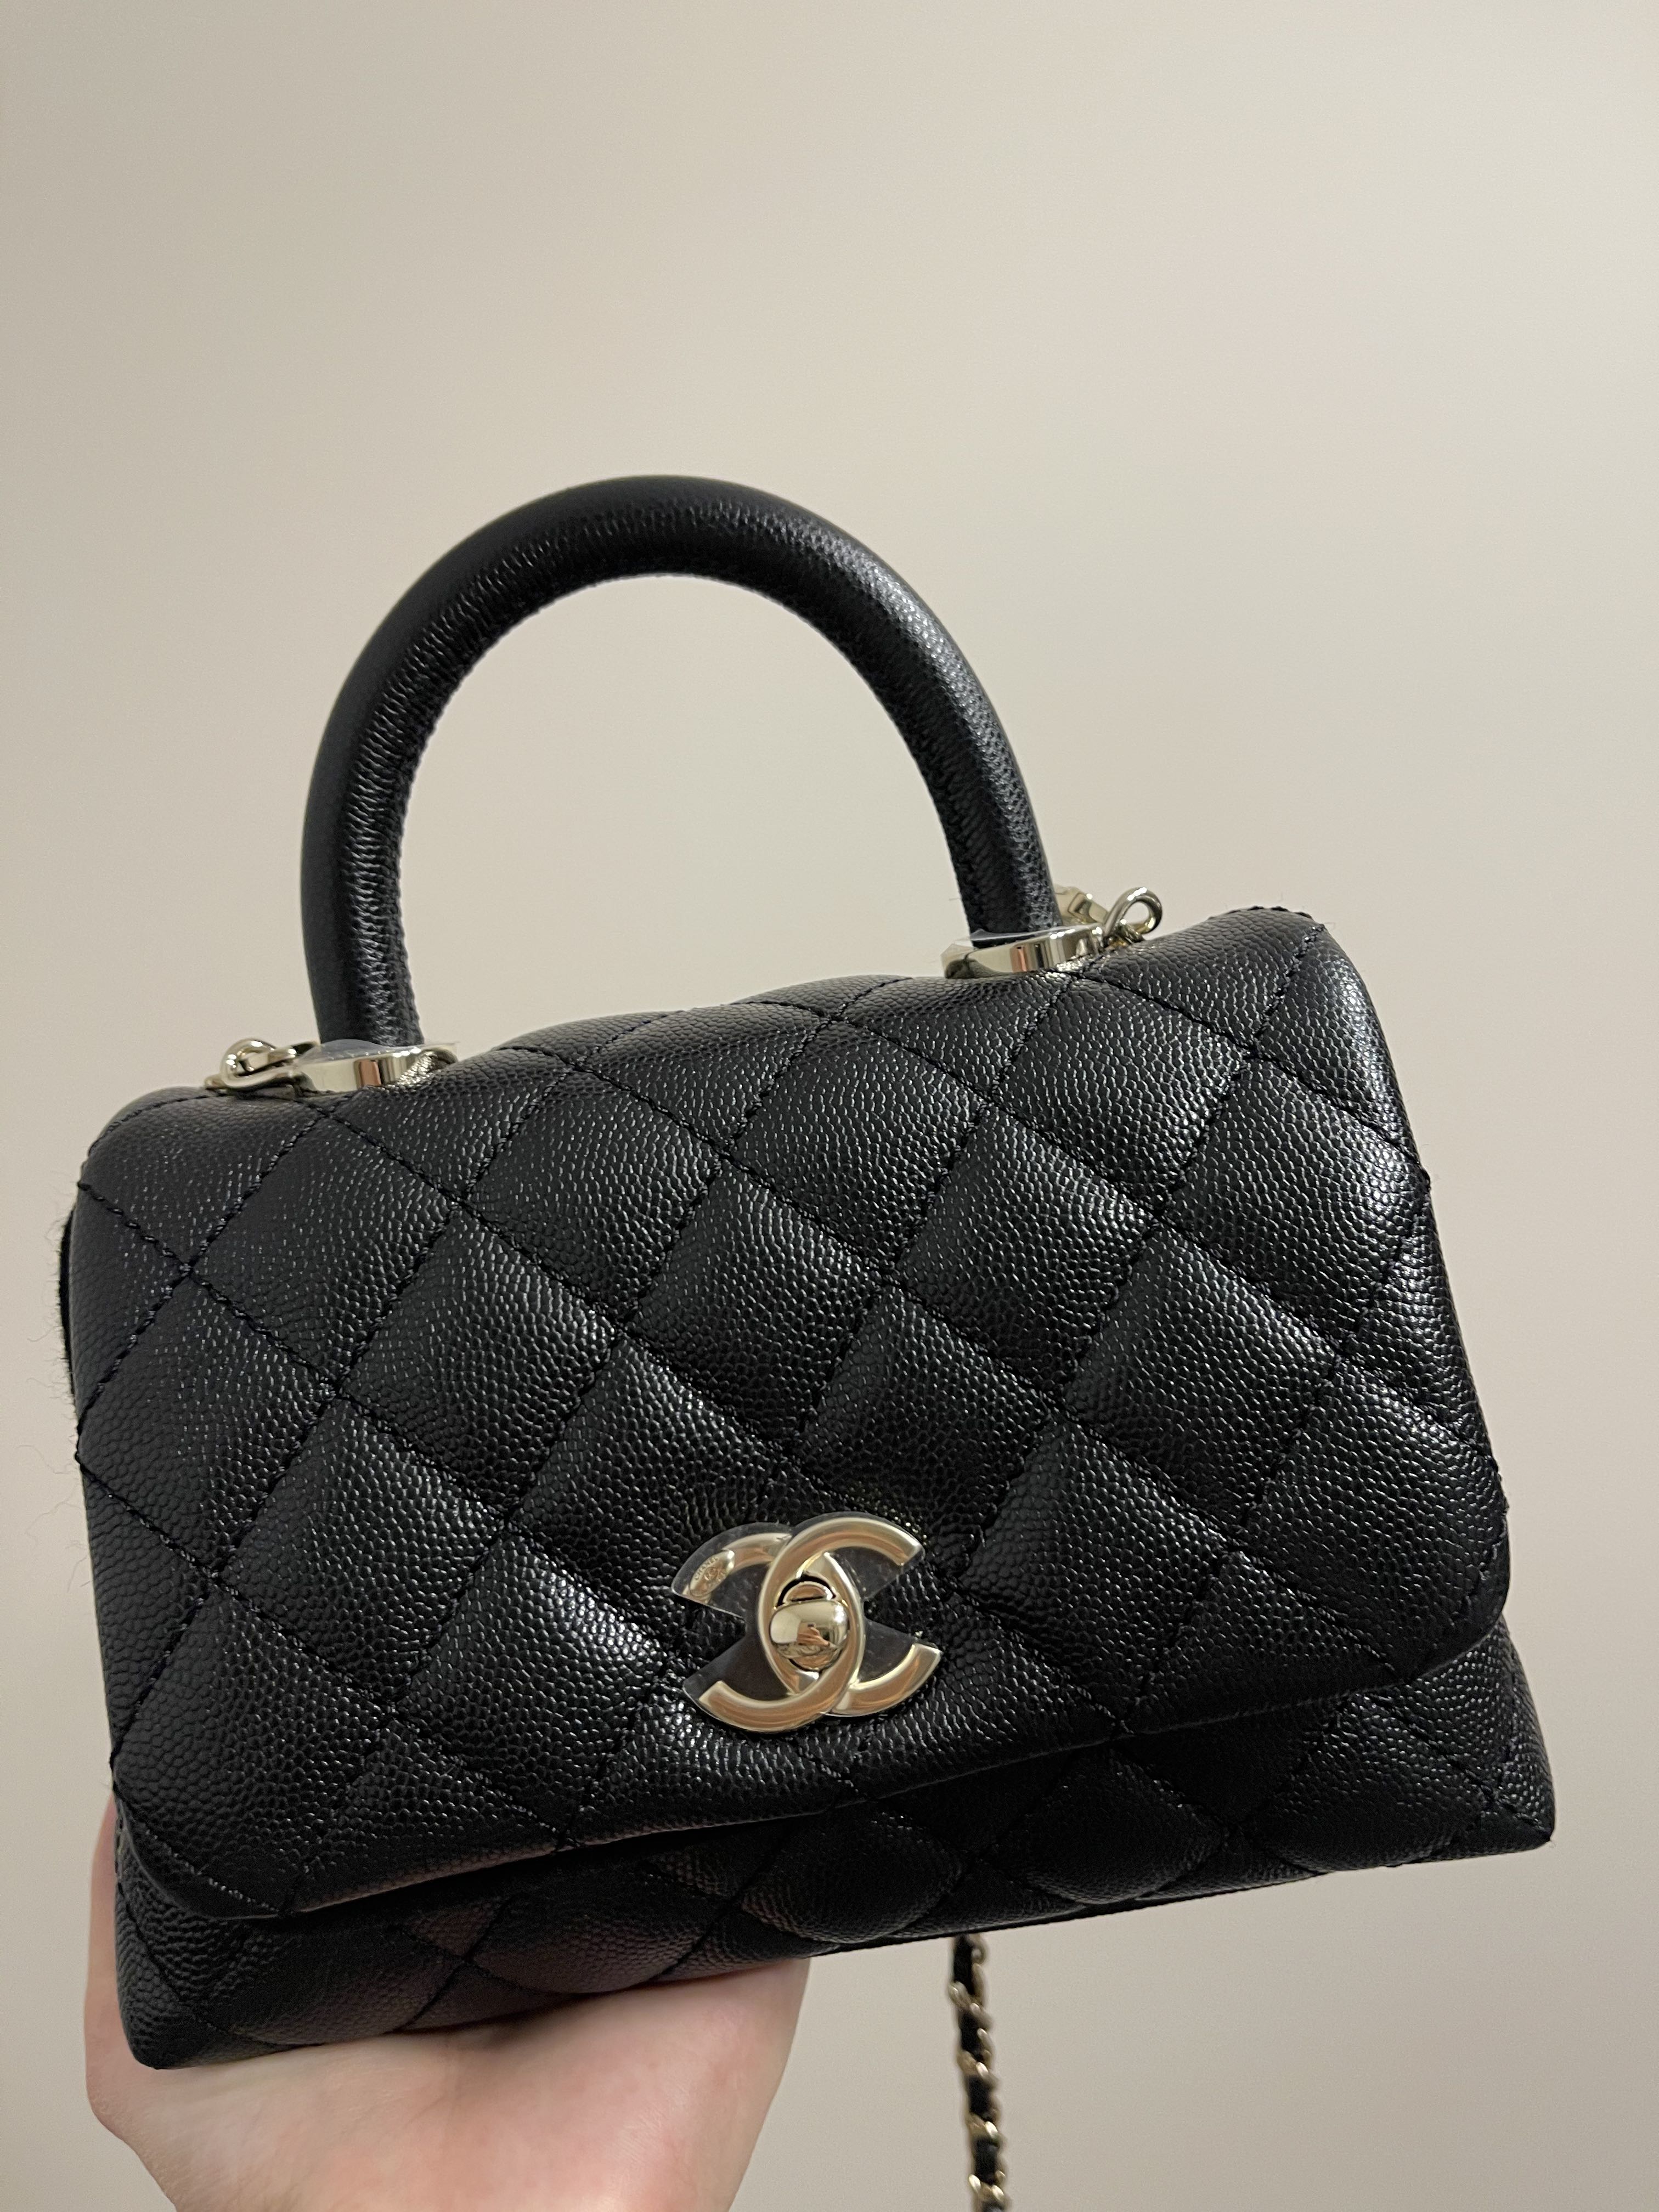 Chanel Purse With Handle | IQS Executive